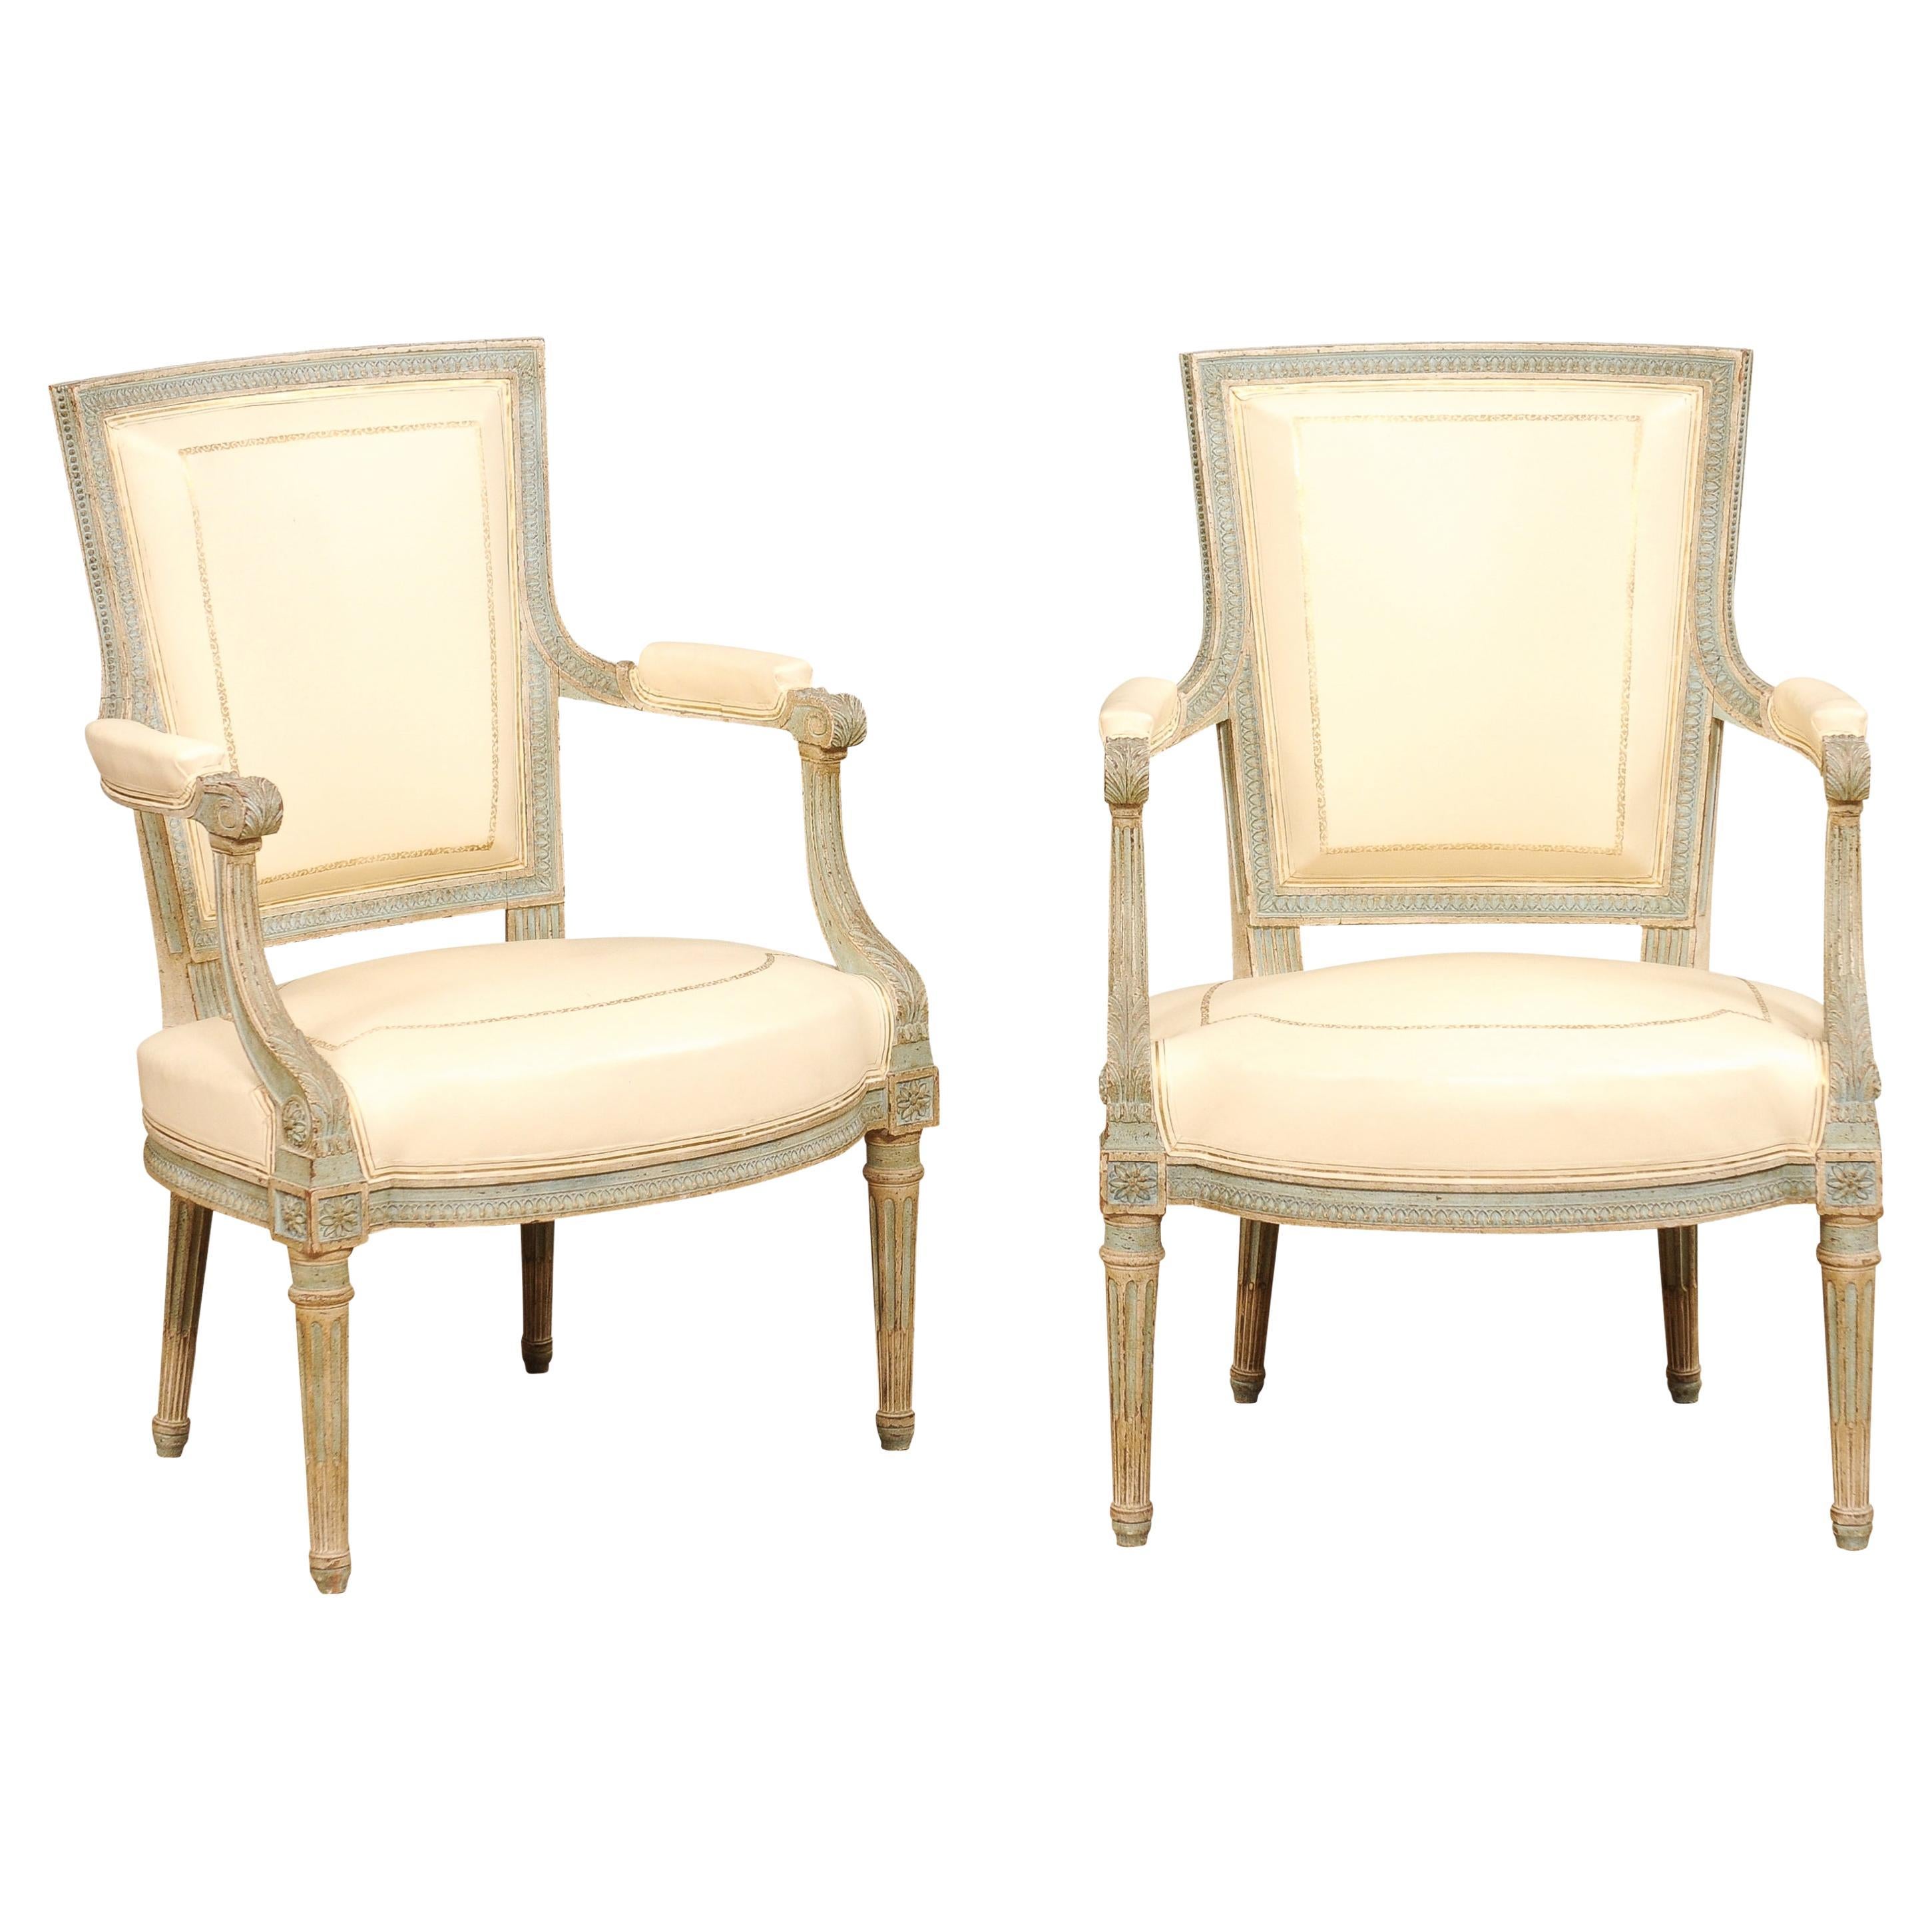 Pair of Louis XVI Style Blue Grey Painted Armchairs Covered in White Leather For Sale